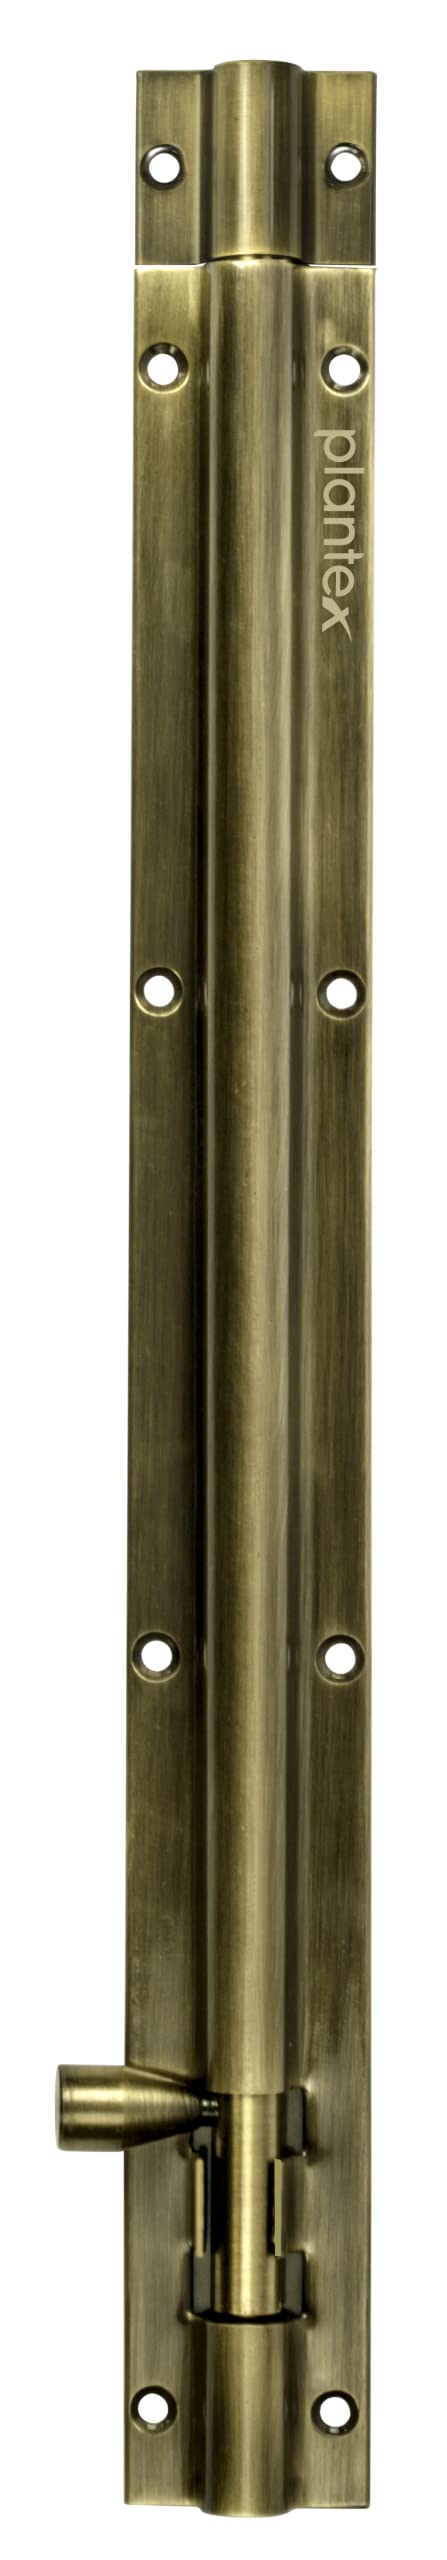 Plantex Heavy Duty 12-inch Joint-Less Tower Bolt for Wooden and PVC Doors for Home Main Door/Bathroom/Windows/Wardrobe - Pack of 6 (Stainless Steel, Brass Antique)